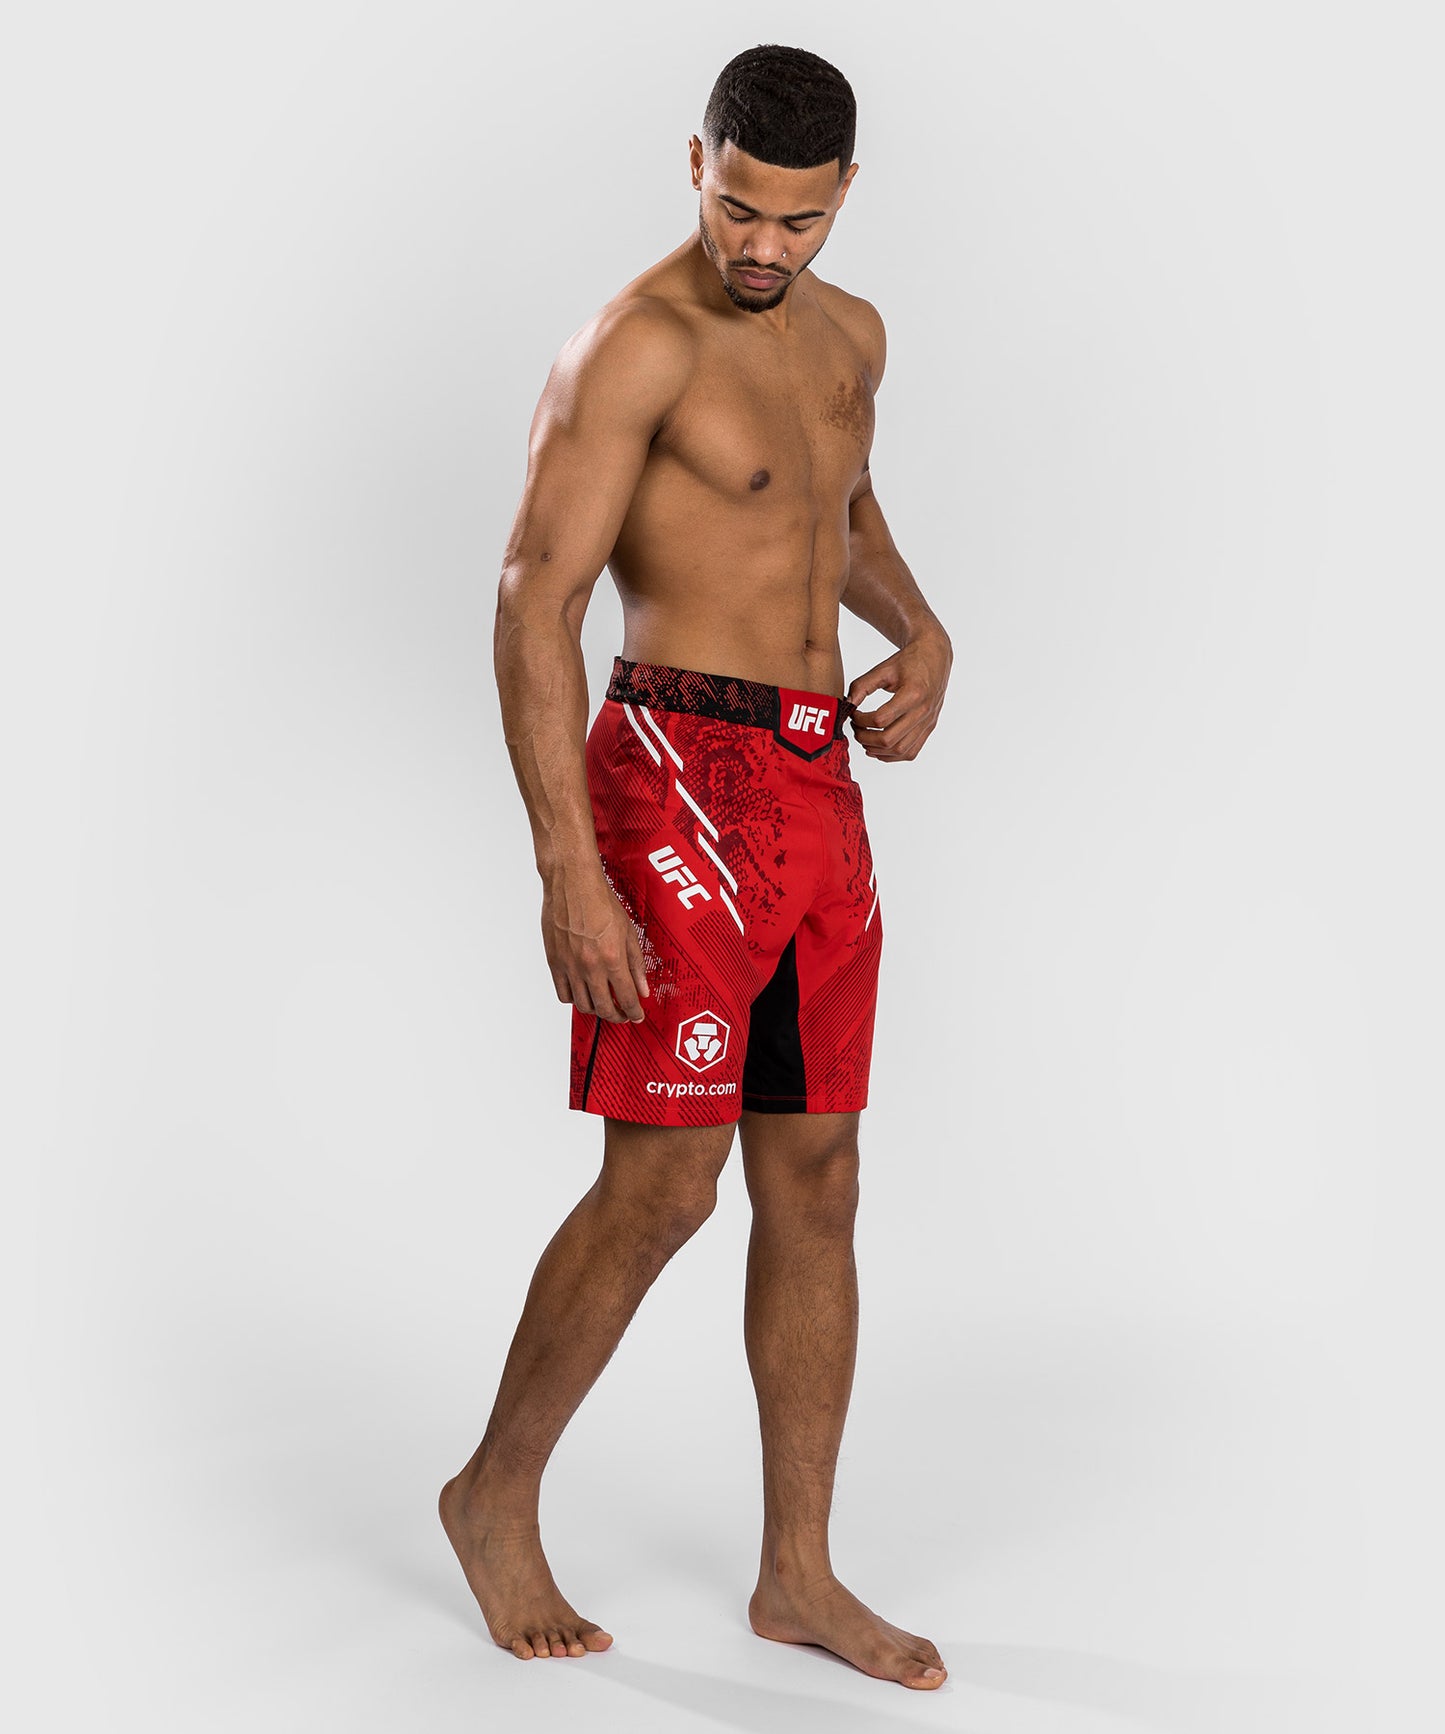 UFC Adrenaline by Venum Personalized Authentic Fight Night Men's Fight Short - Long Fit - Red